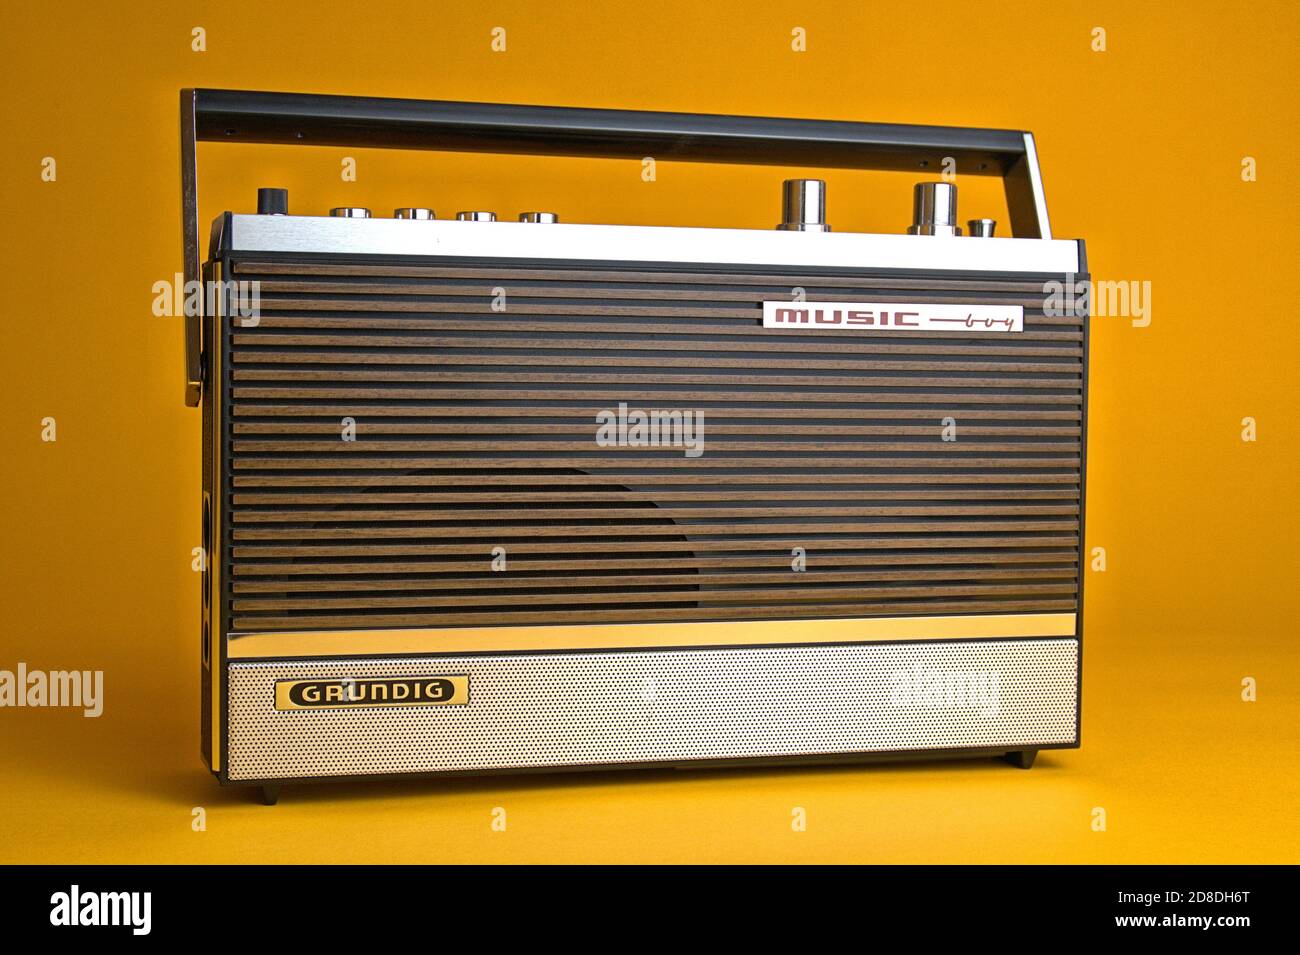 Schleswig, Deutschland. 28th Oct, 2020. An old portable radio made by  Grundig, type Music-Boy 209, which was built and sold from 1969 to 1970.  Photo against a vintage 1970s style background. The